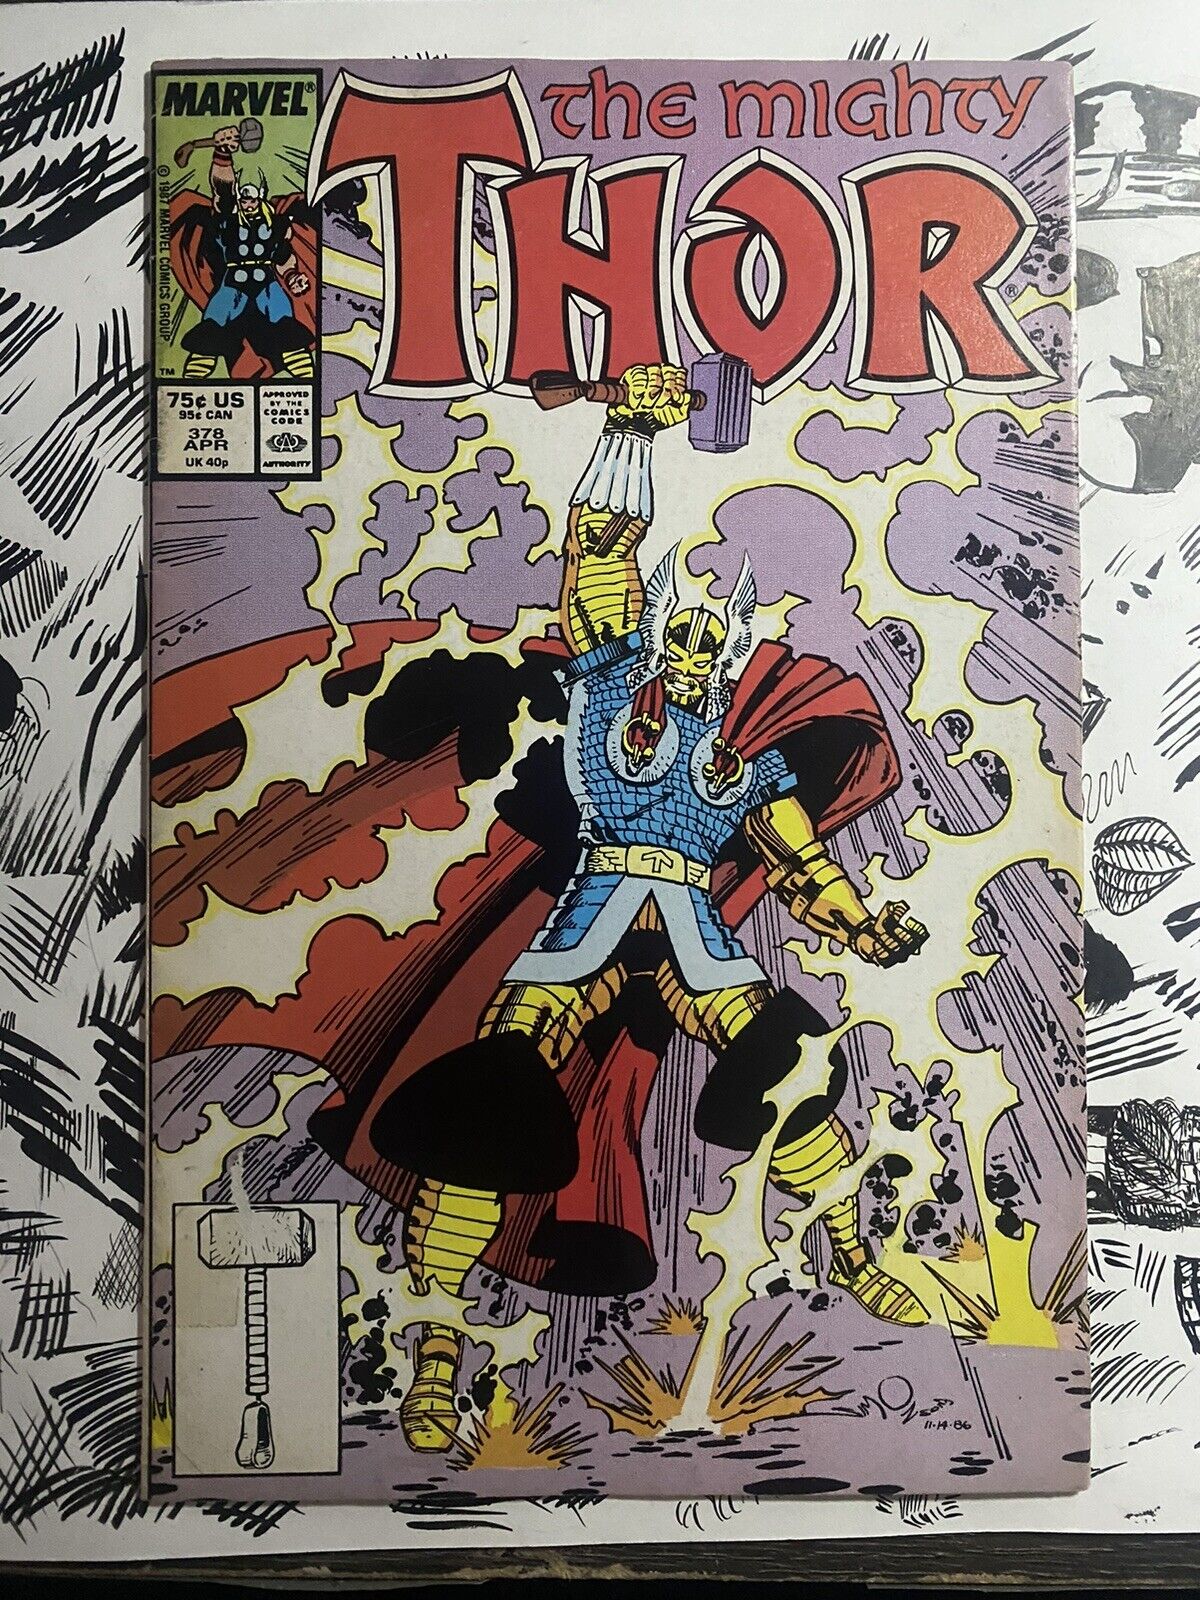 The Mighty Thor #378 | Marvel Comic